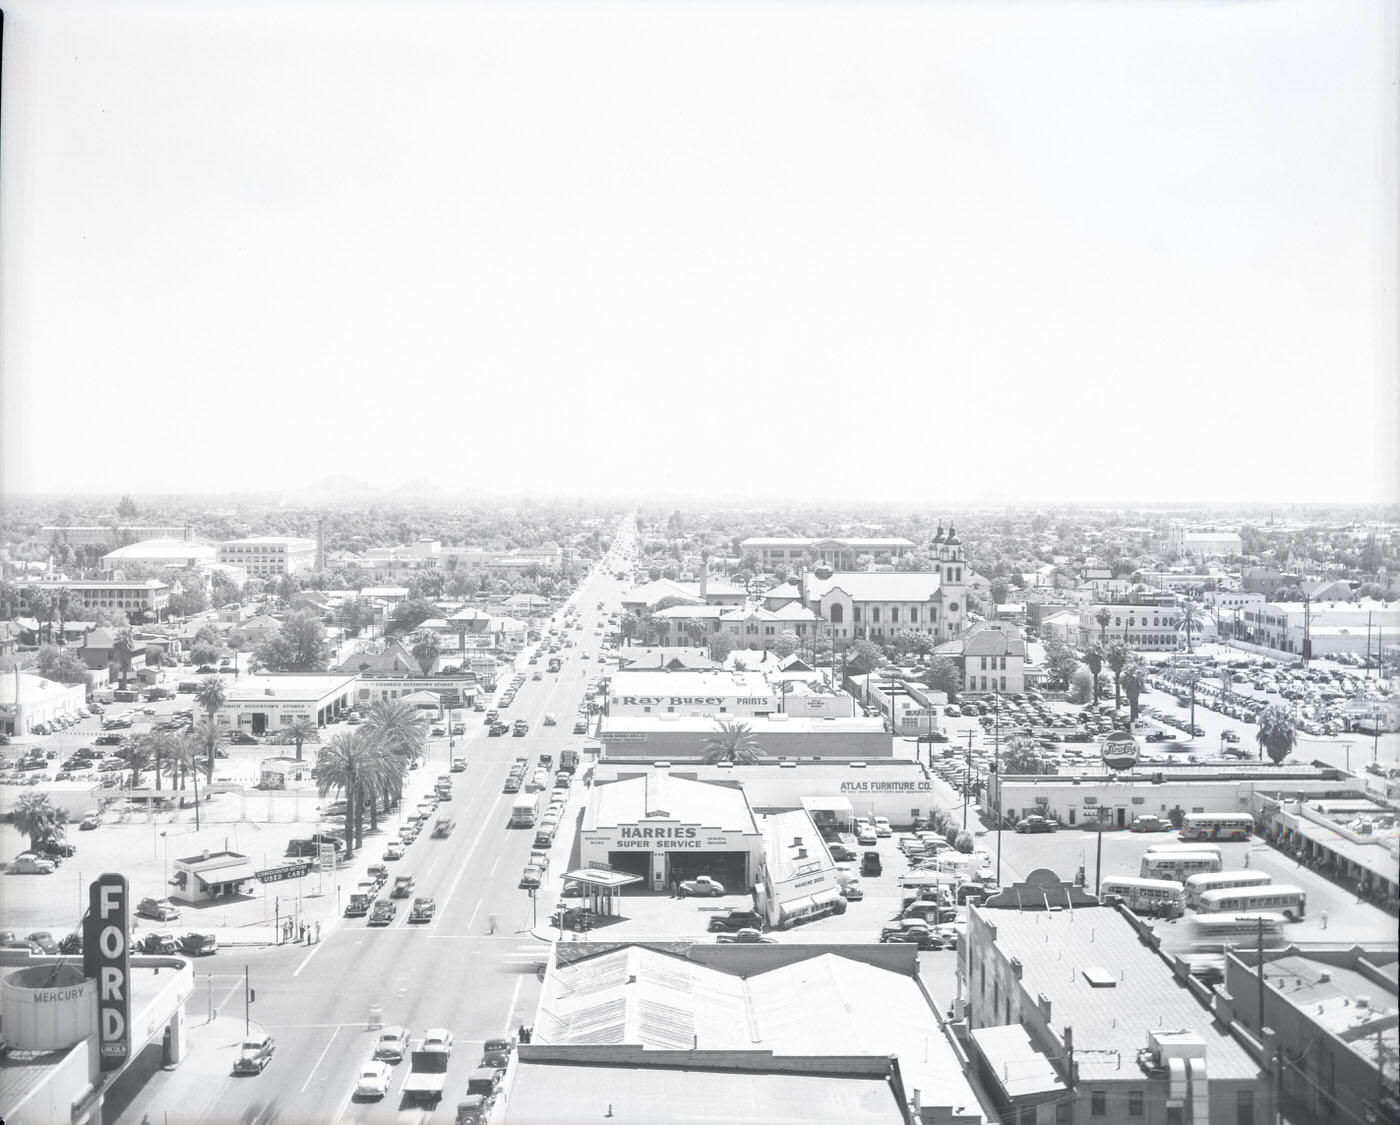 Cityscape of Downtown Phoenix, 1946. View looking east down E. Van Buren Street. Photographer is standing on a rooftop at approximately the intersection of Van Buren and Central. St. Mary's Basilica and portions of Monroe St. are visible